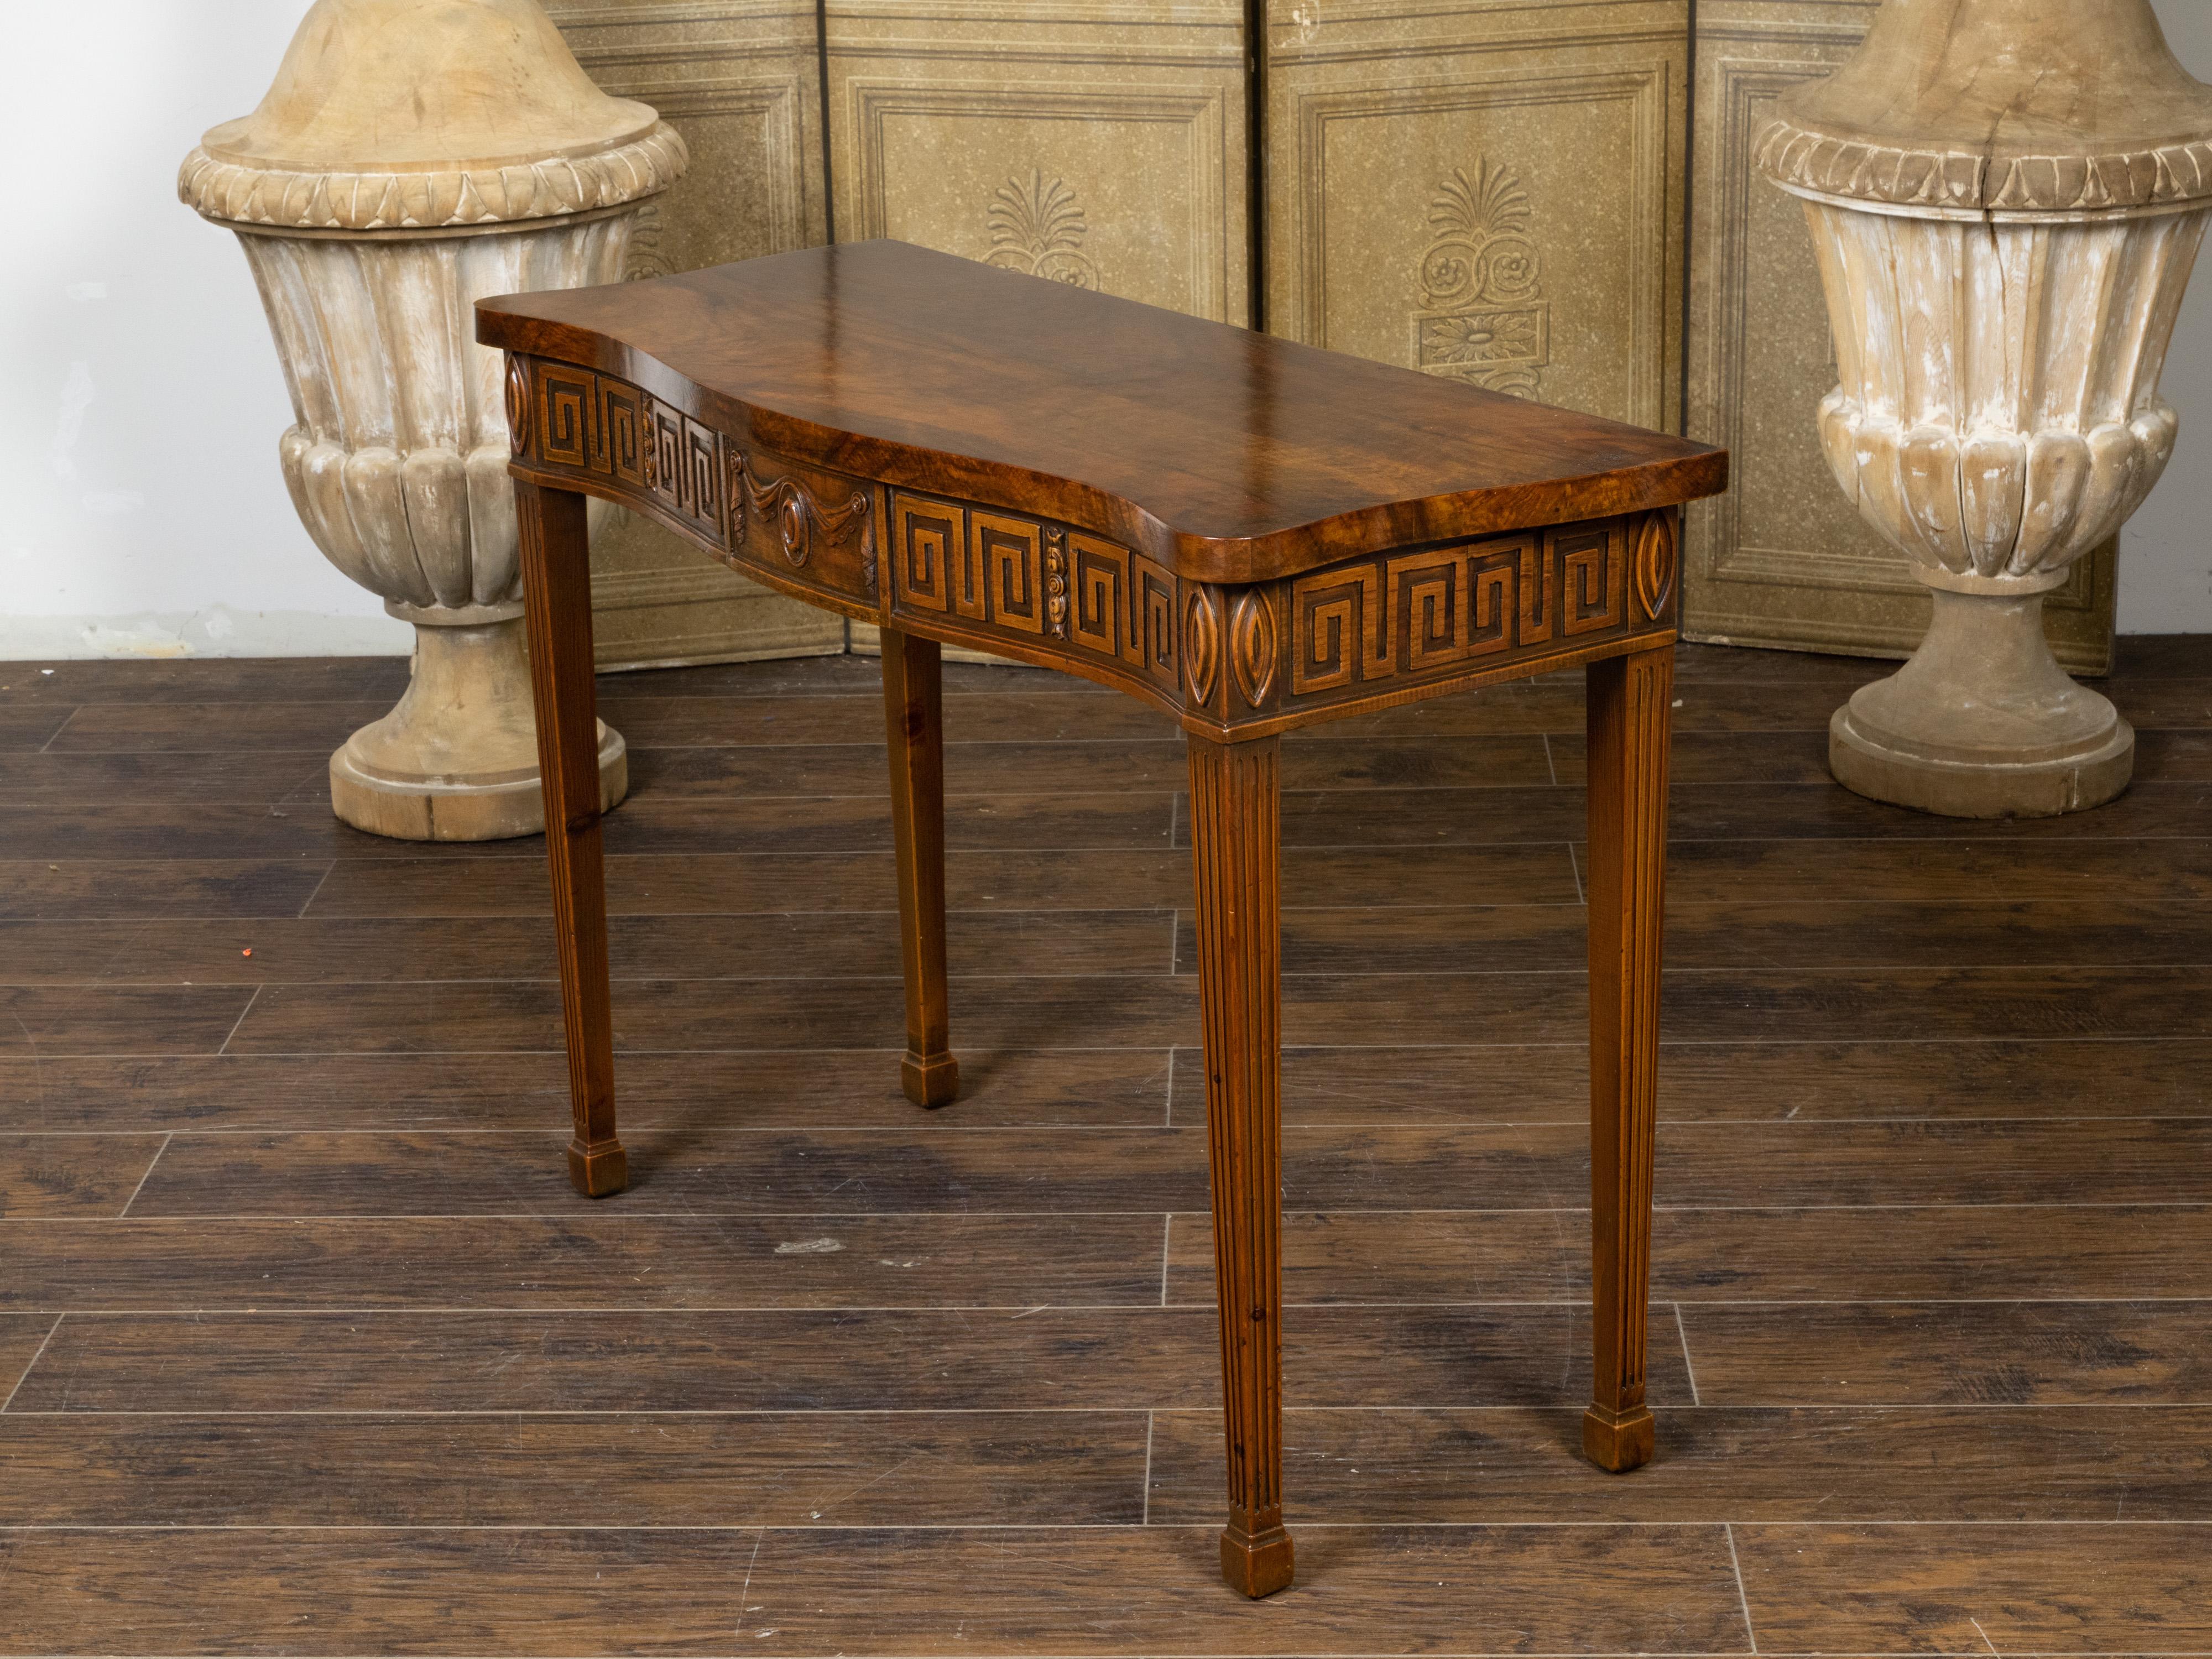 Carved English 19th Century Neoclassical Revival Mahogany Console Table with Greek Key